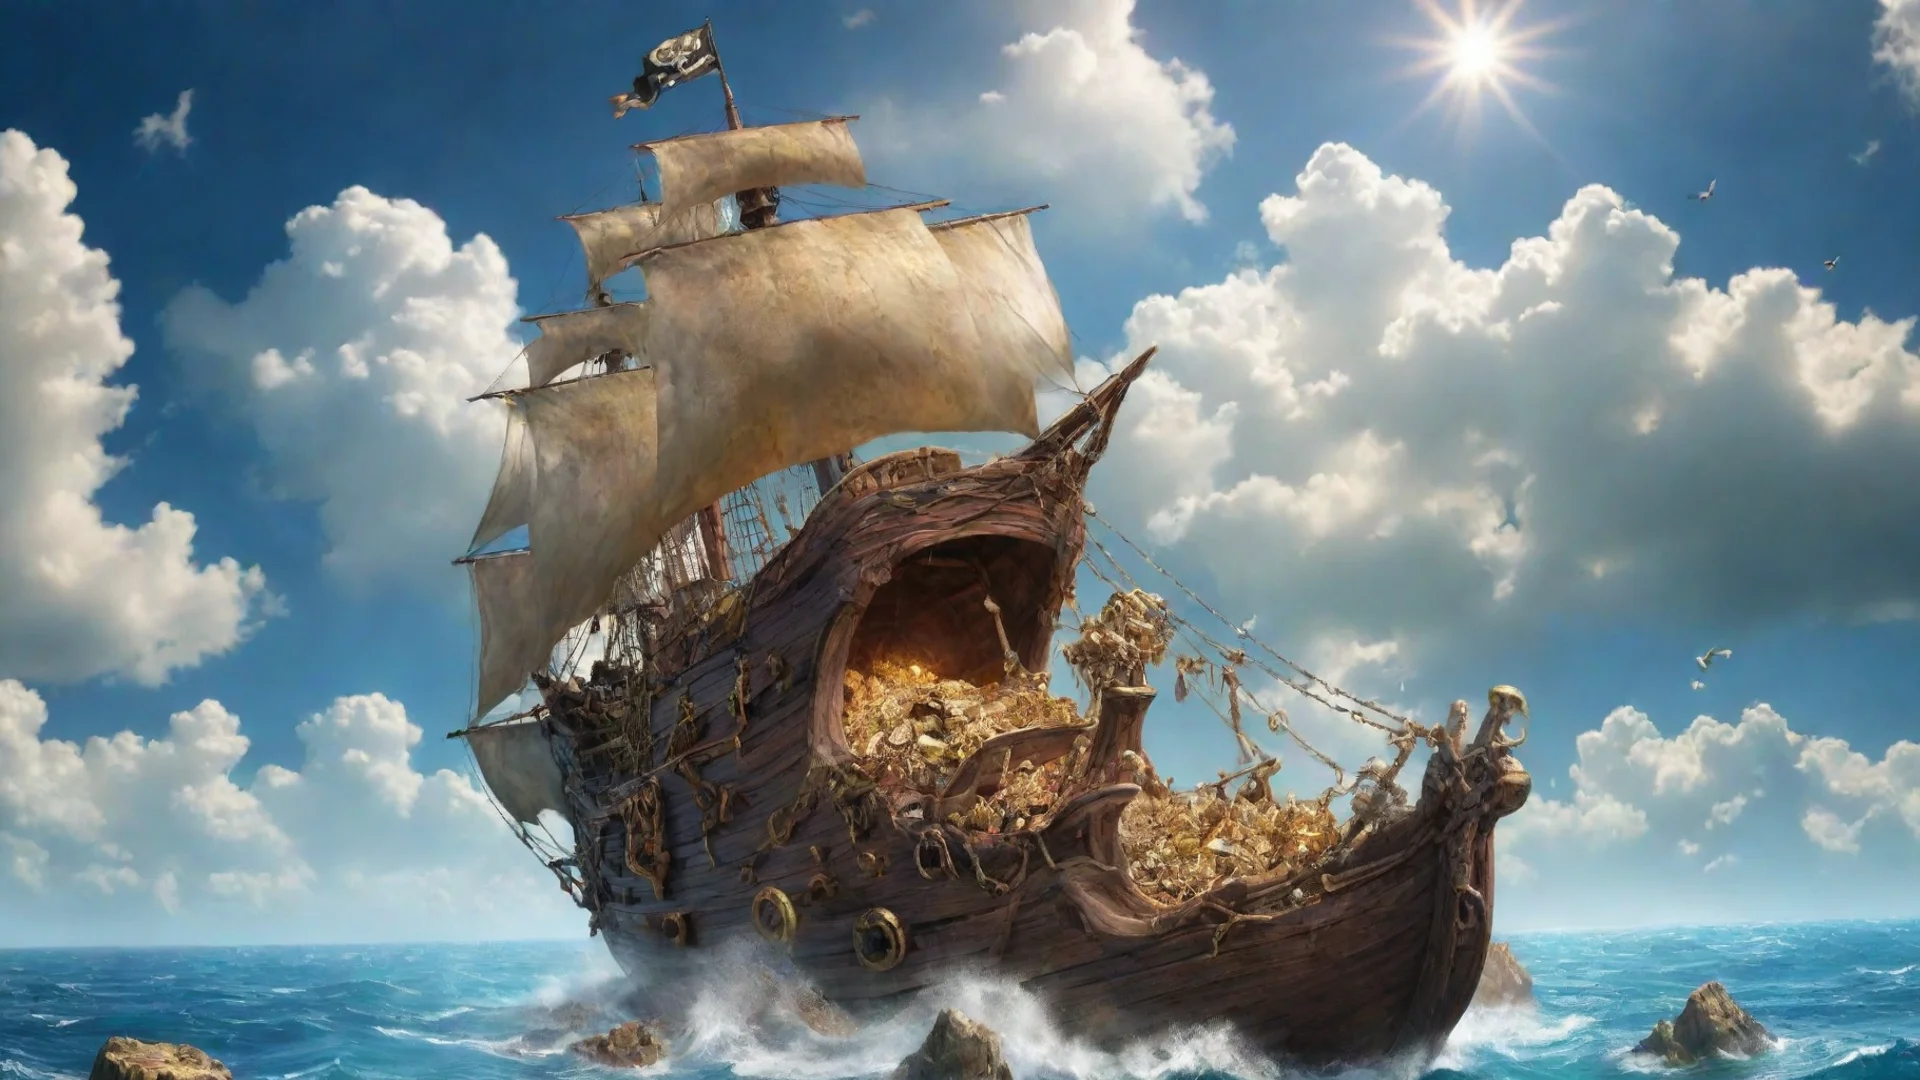 aiamazing  pirate treasure in the sky  awesome portrait 2 wide